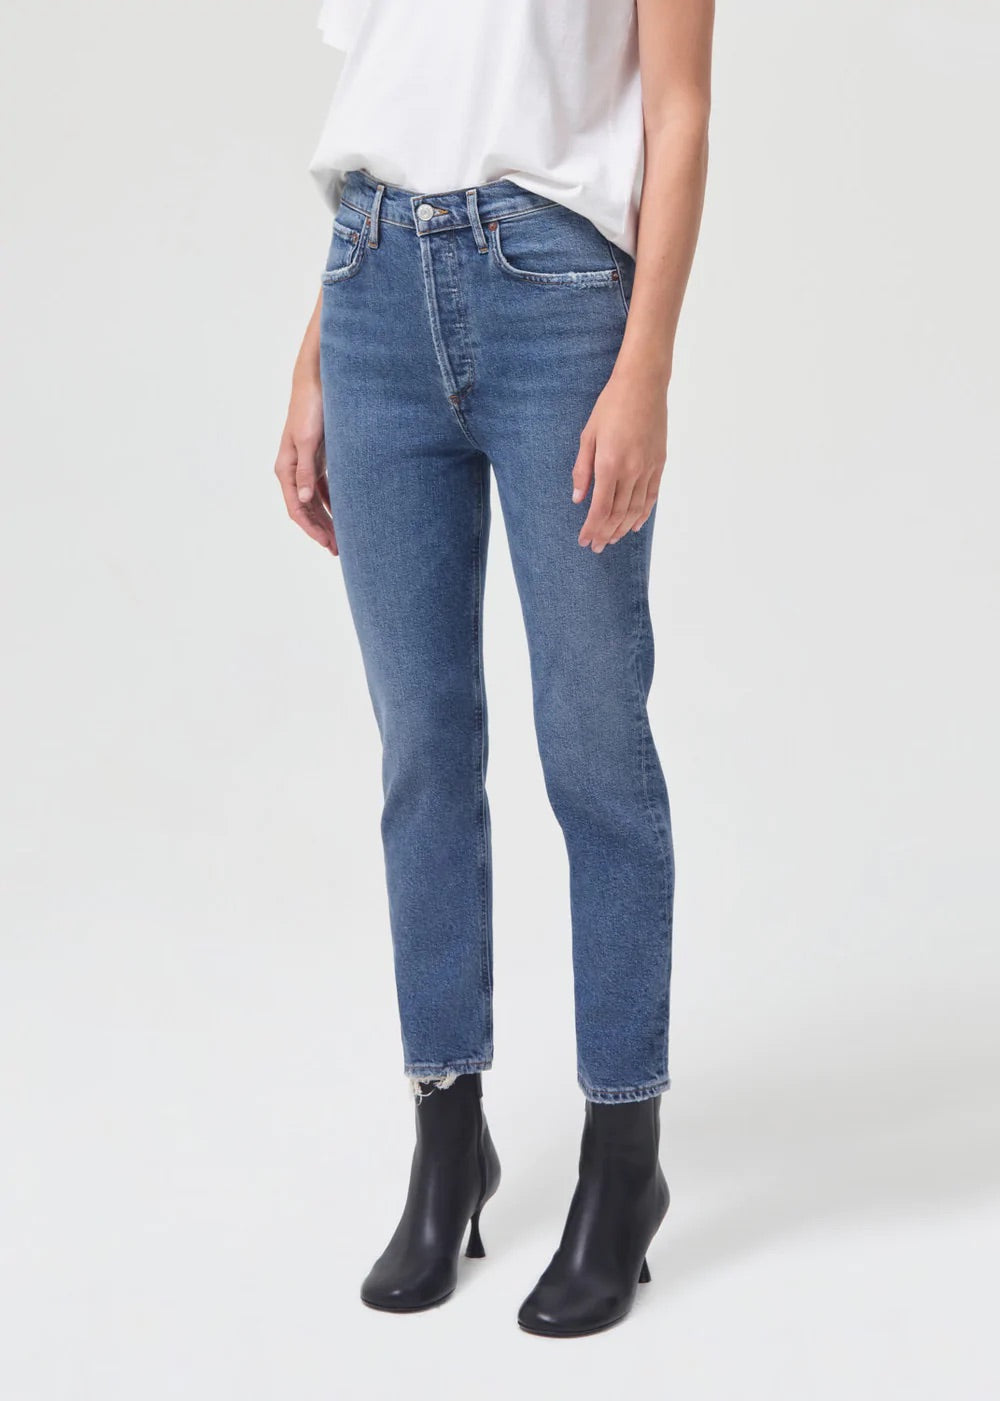 The model is wearing a Riley Straight Crop - Silence t - shirt and denim jeans with a straight leg from AGOLDE.